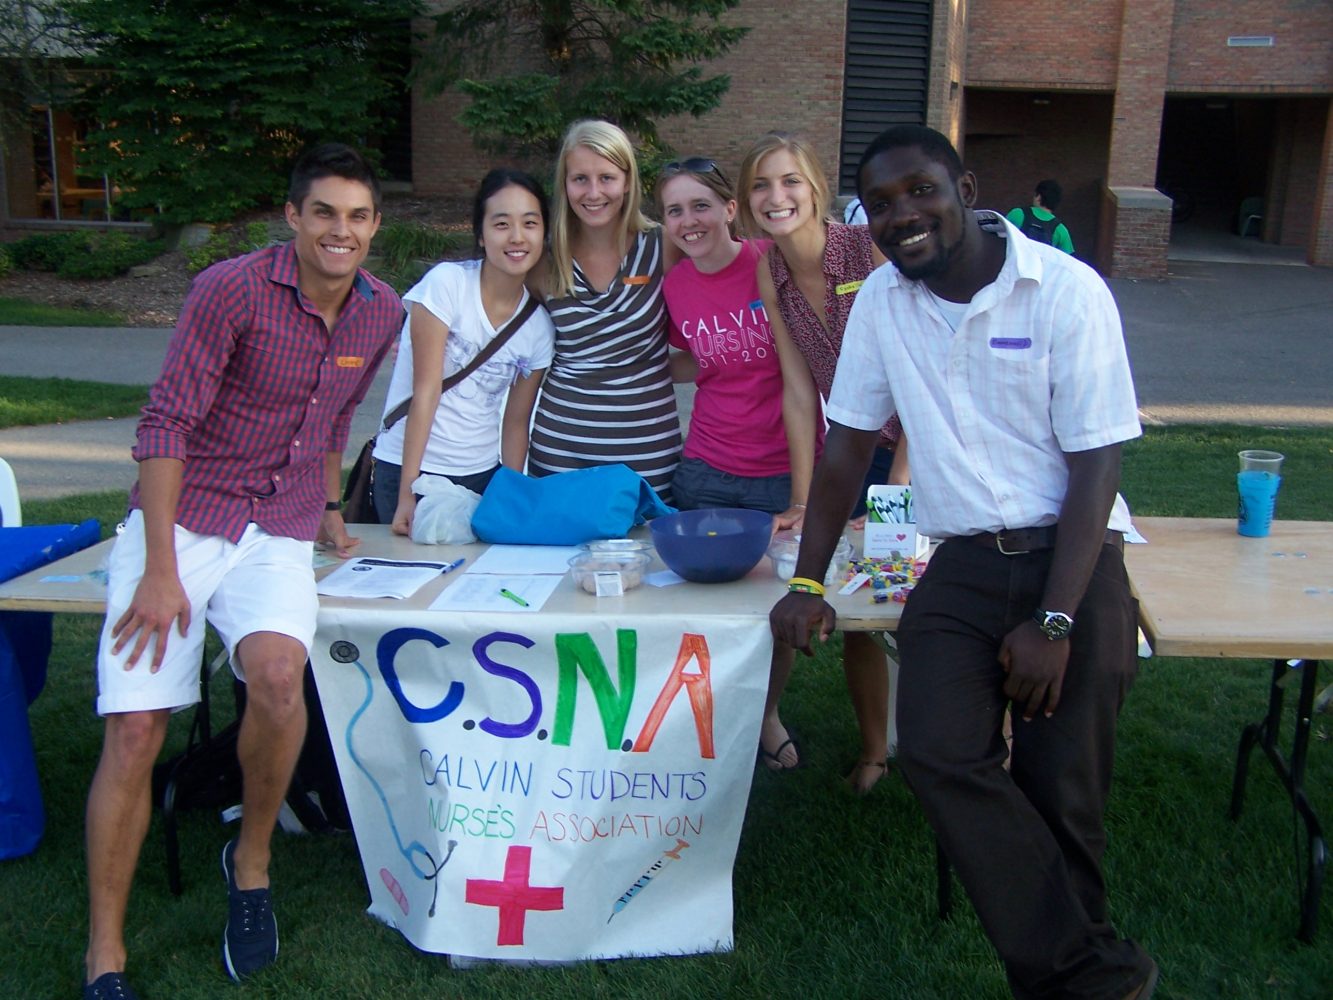 Members+of+the+Calvin+Students+Nurses+Association+recruit+new+members+at+Cokes+and+Clubs.+Photo+by+Connor+Sterchi